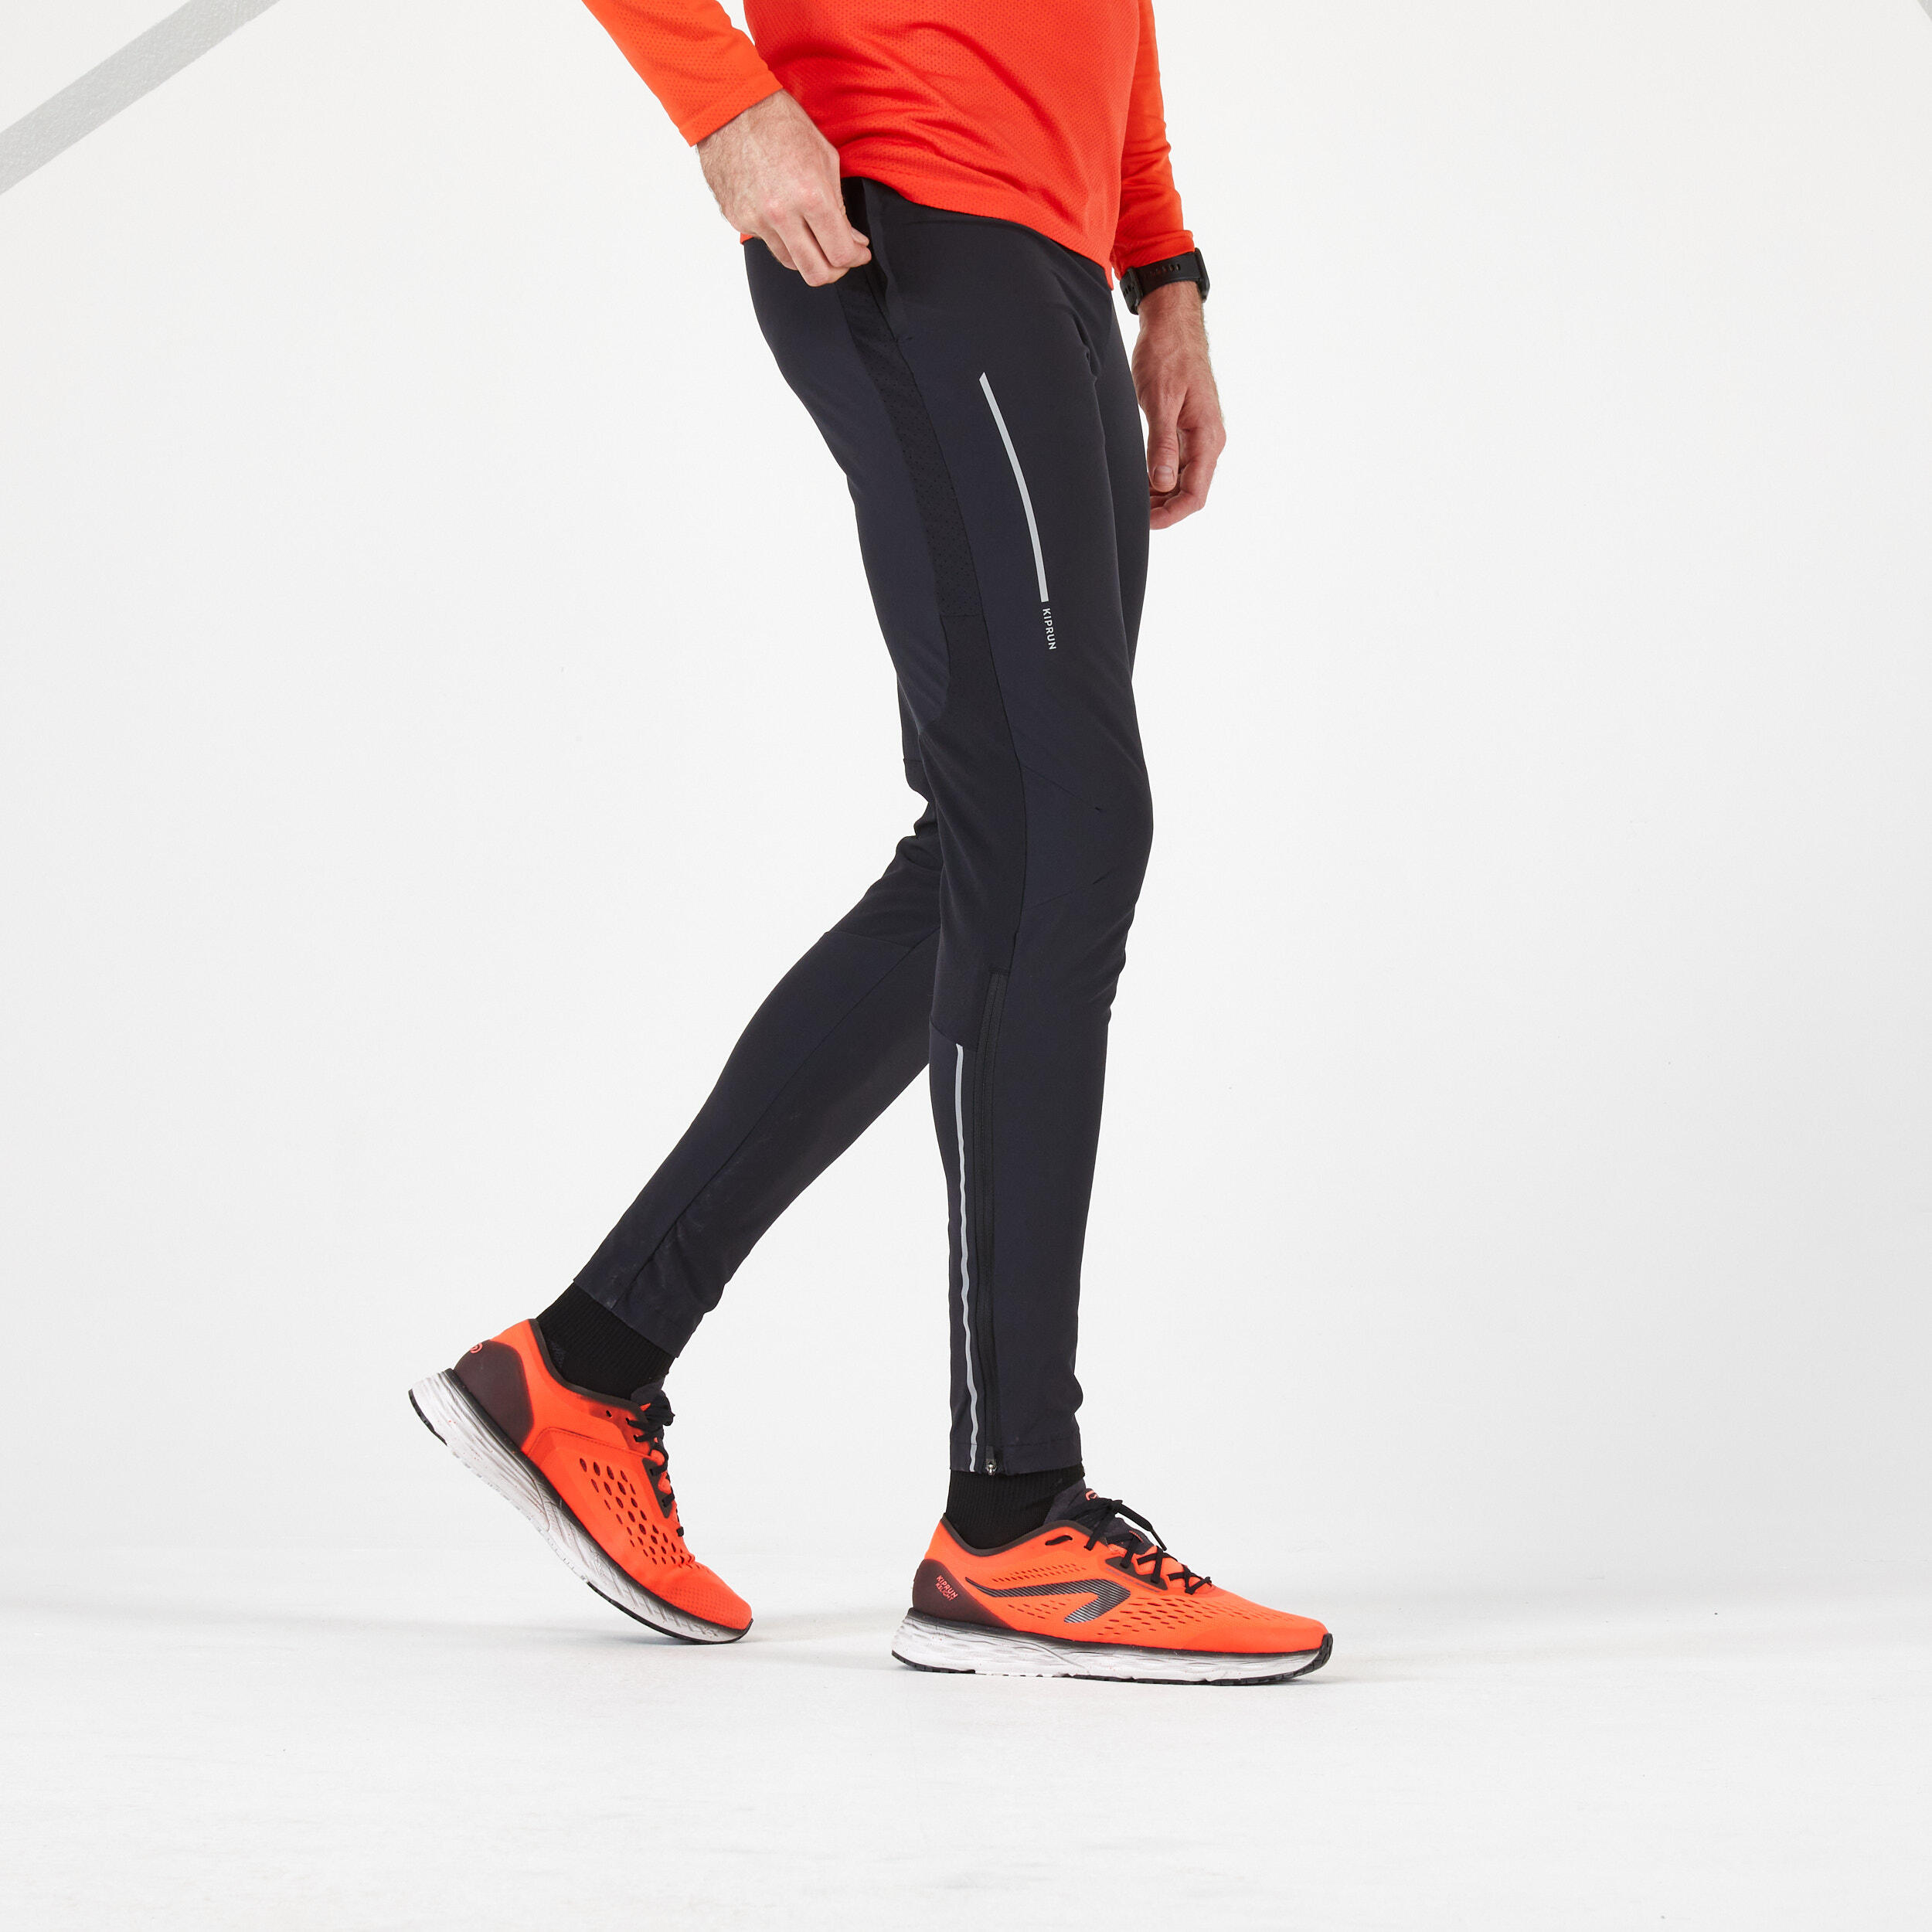 Decathlon Running Leggings Reviews Pants | International Society of  Precision Agriculture